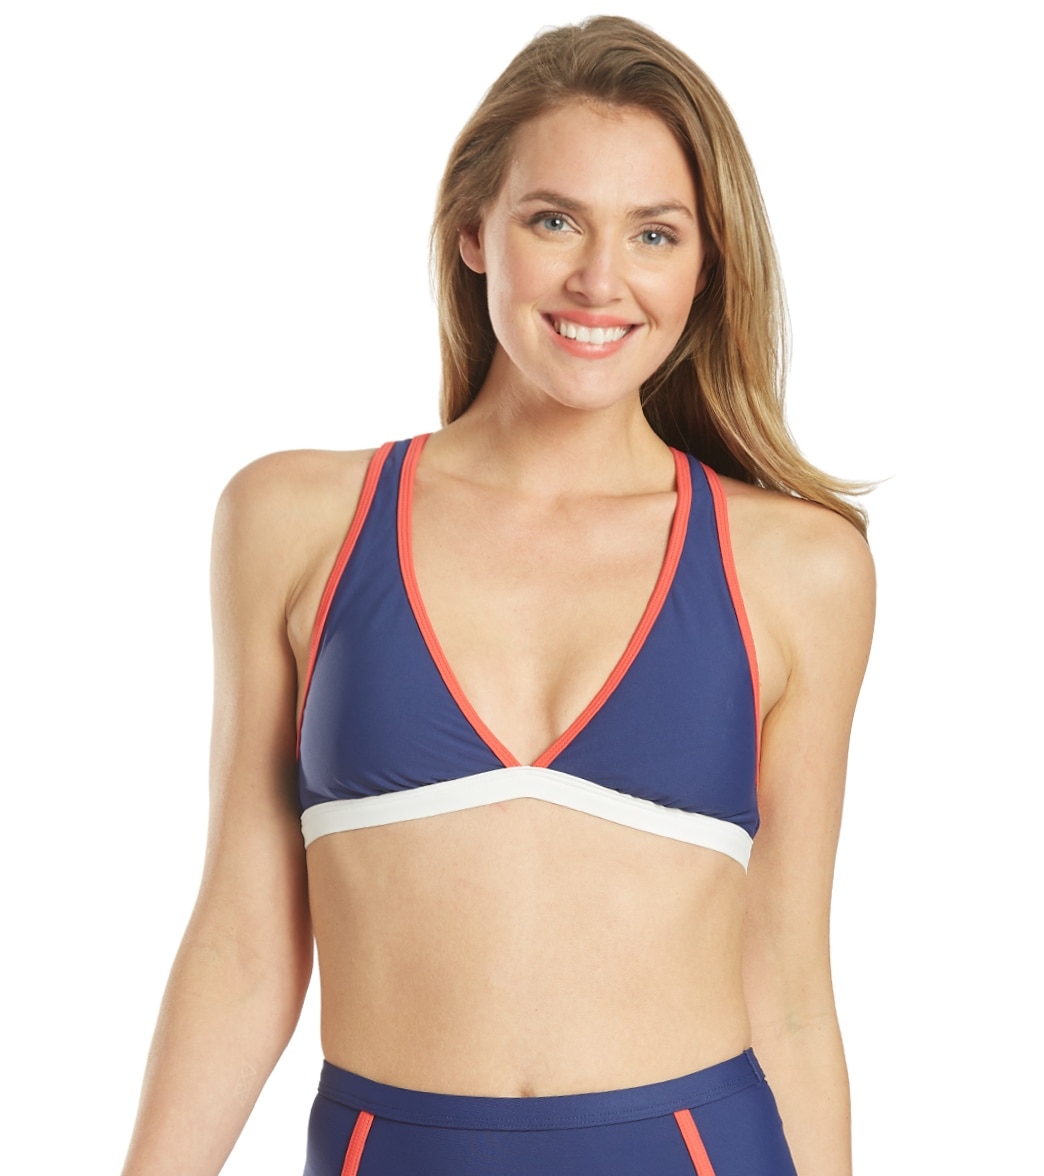 Next Coral Reef Paddle Out Bikini Top - Navy Large - Swimoutlet.com